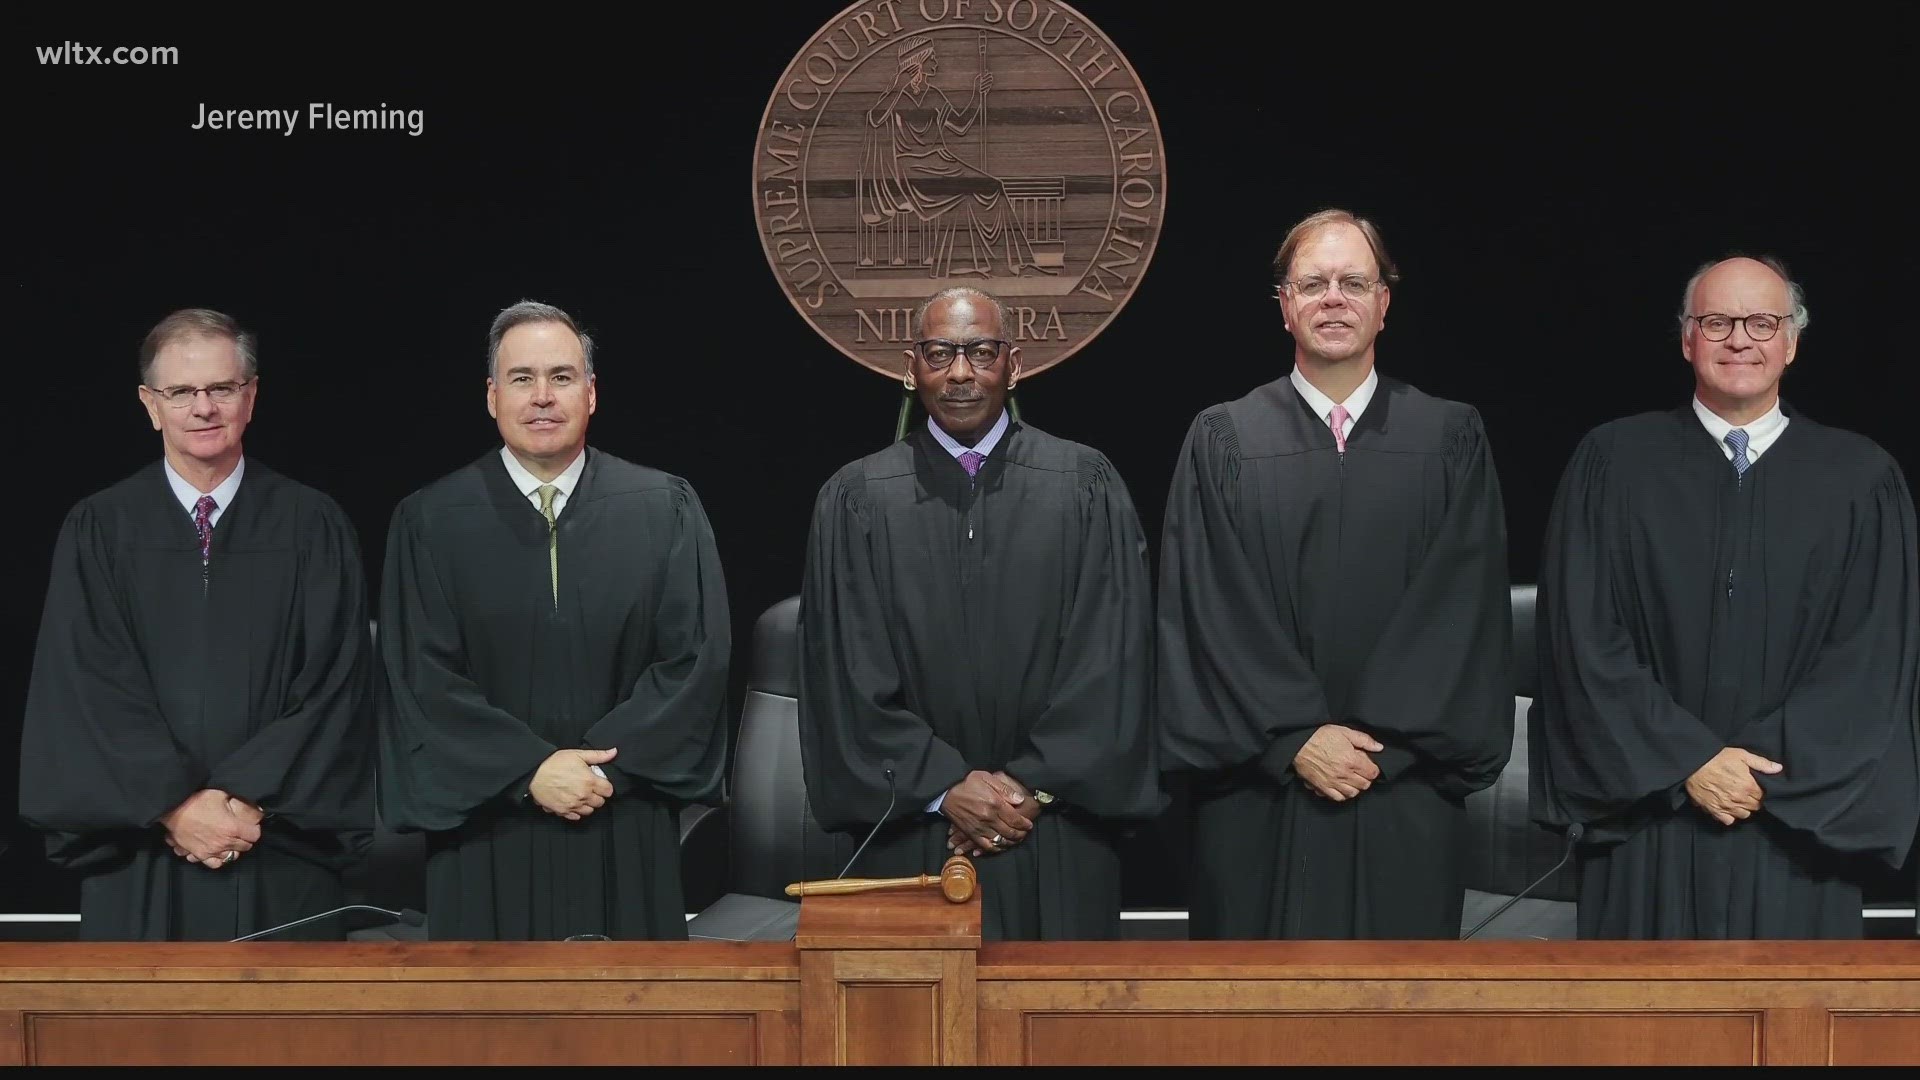 And how South Carolina ended up with an all male Supreme Court.